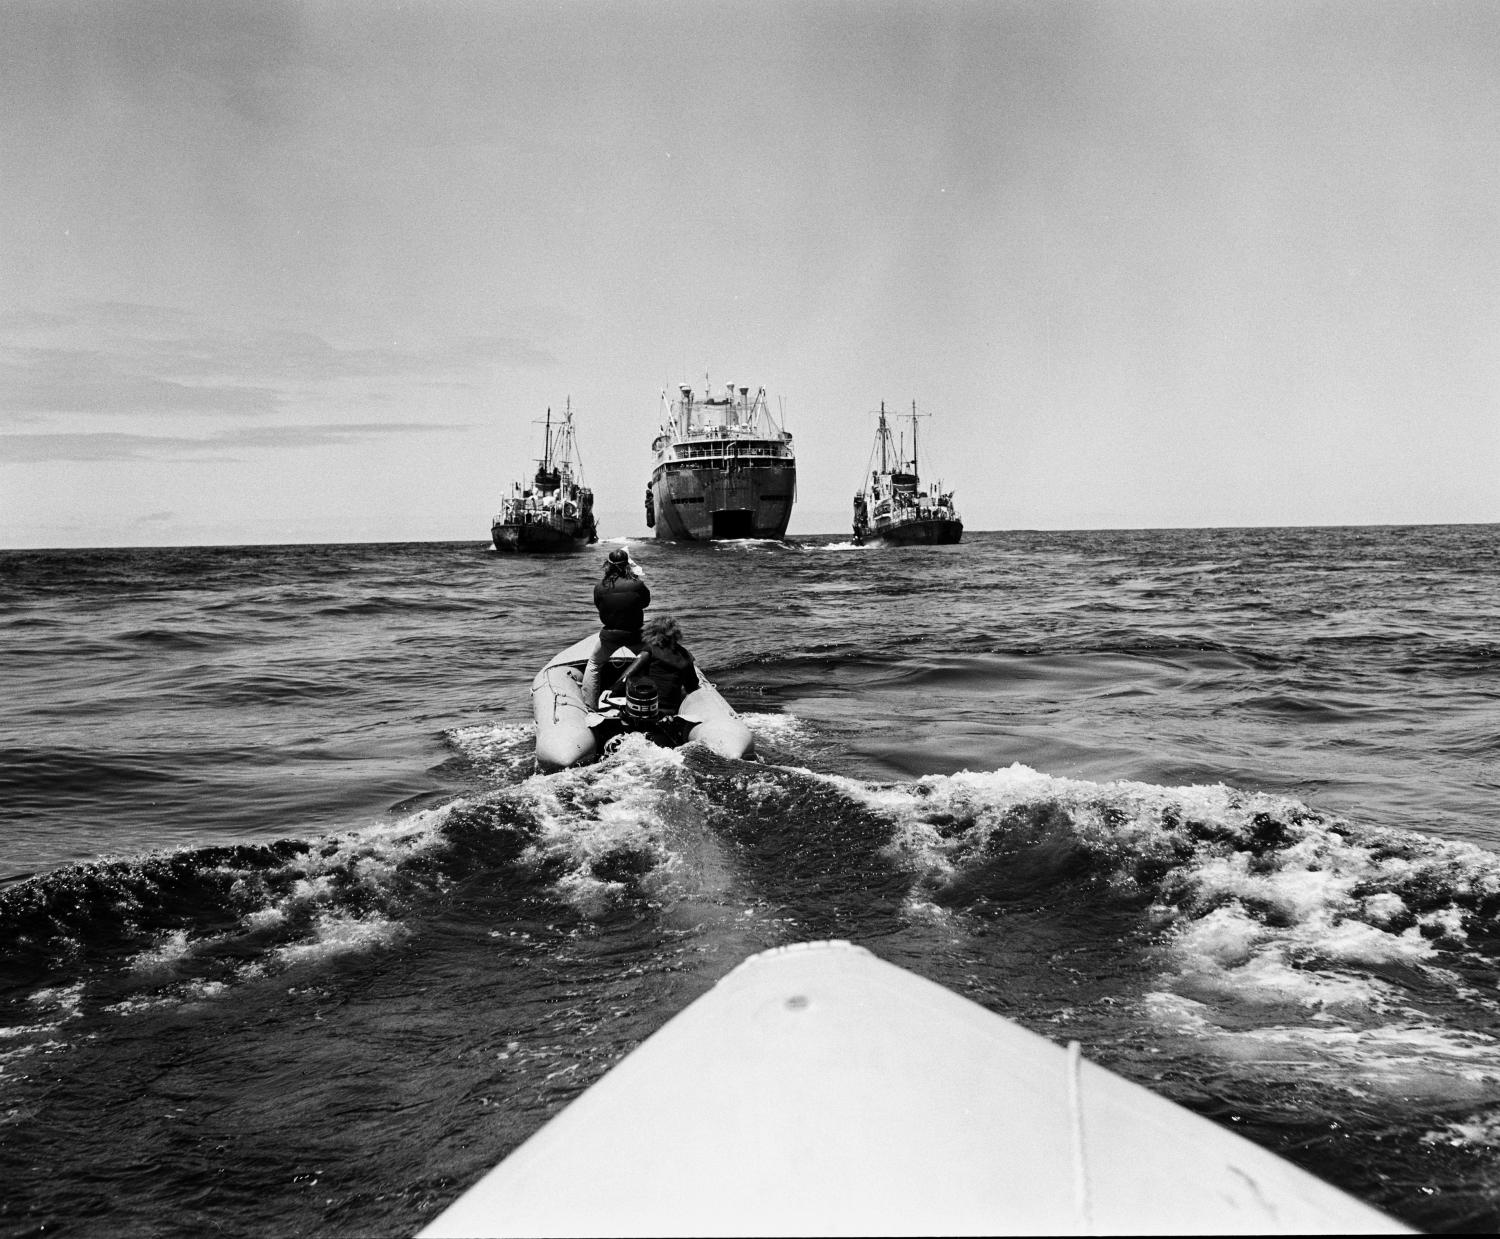 Greenpeace confront Soviet whaling ships in 1975.